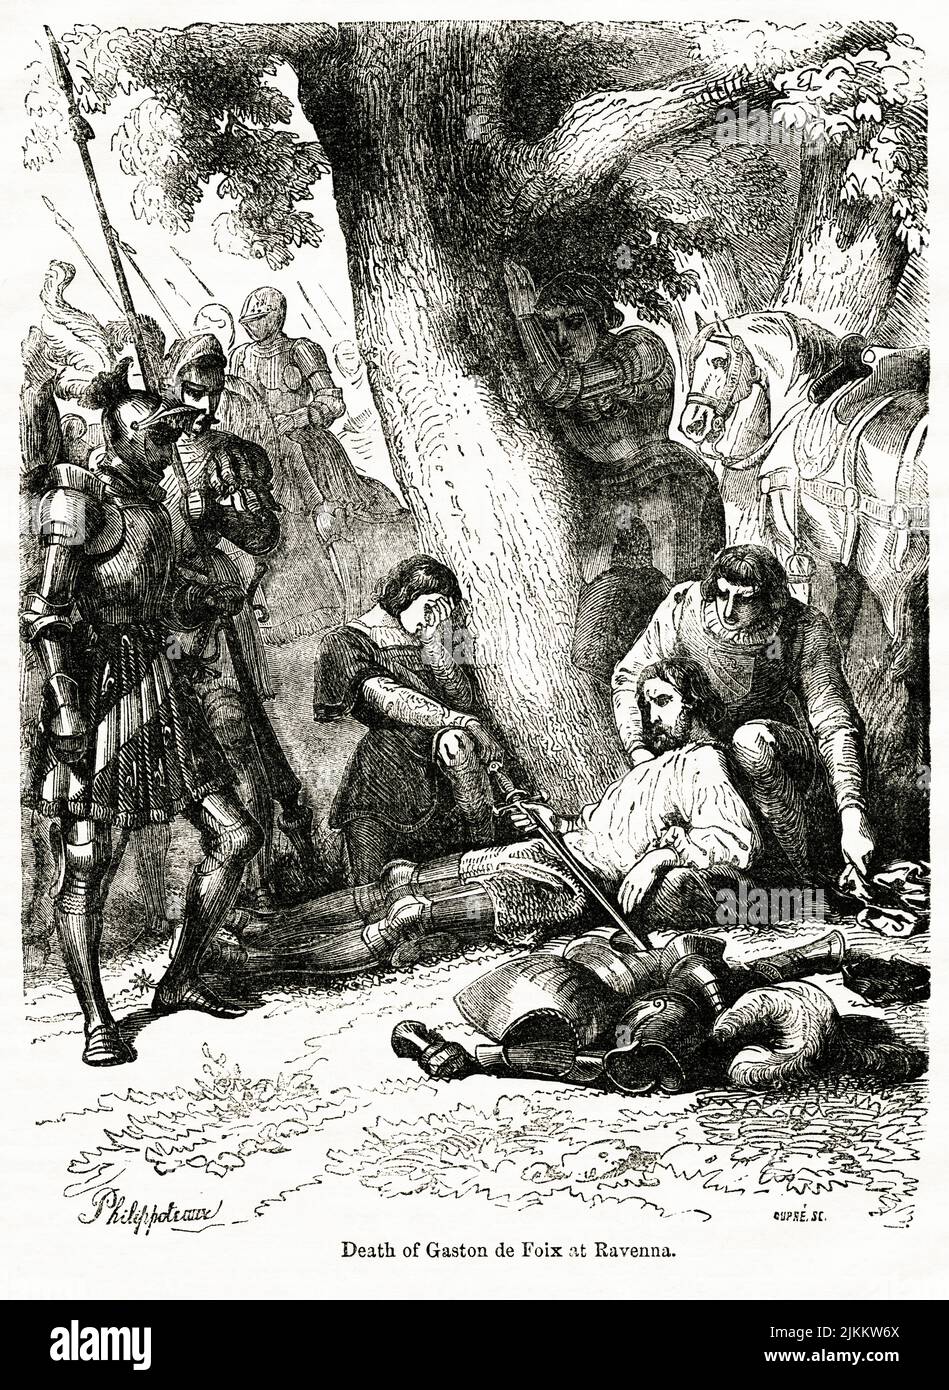 Death of Gaston de Fix at Ravenna, Illustration from the Book, 'John Cassel’s Illustrated History of England, Volume II', text by William Howitt, Cassell, Petter, and Galpin, London, 1858 Stock Photo